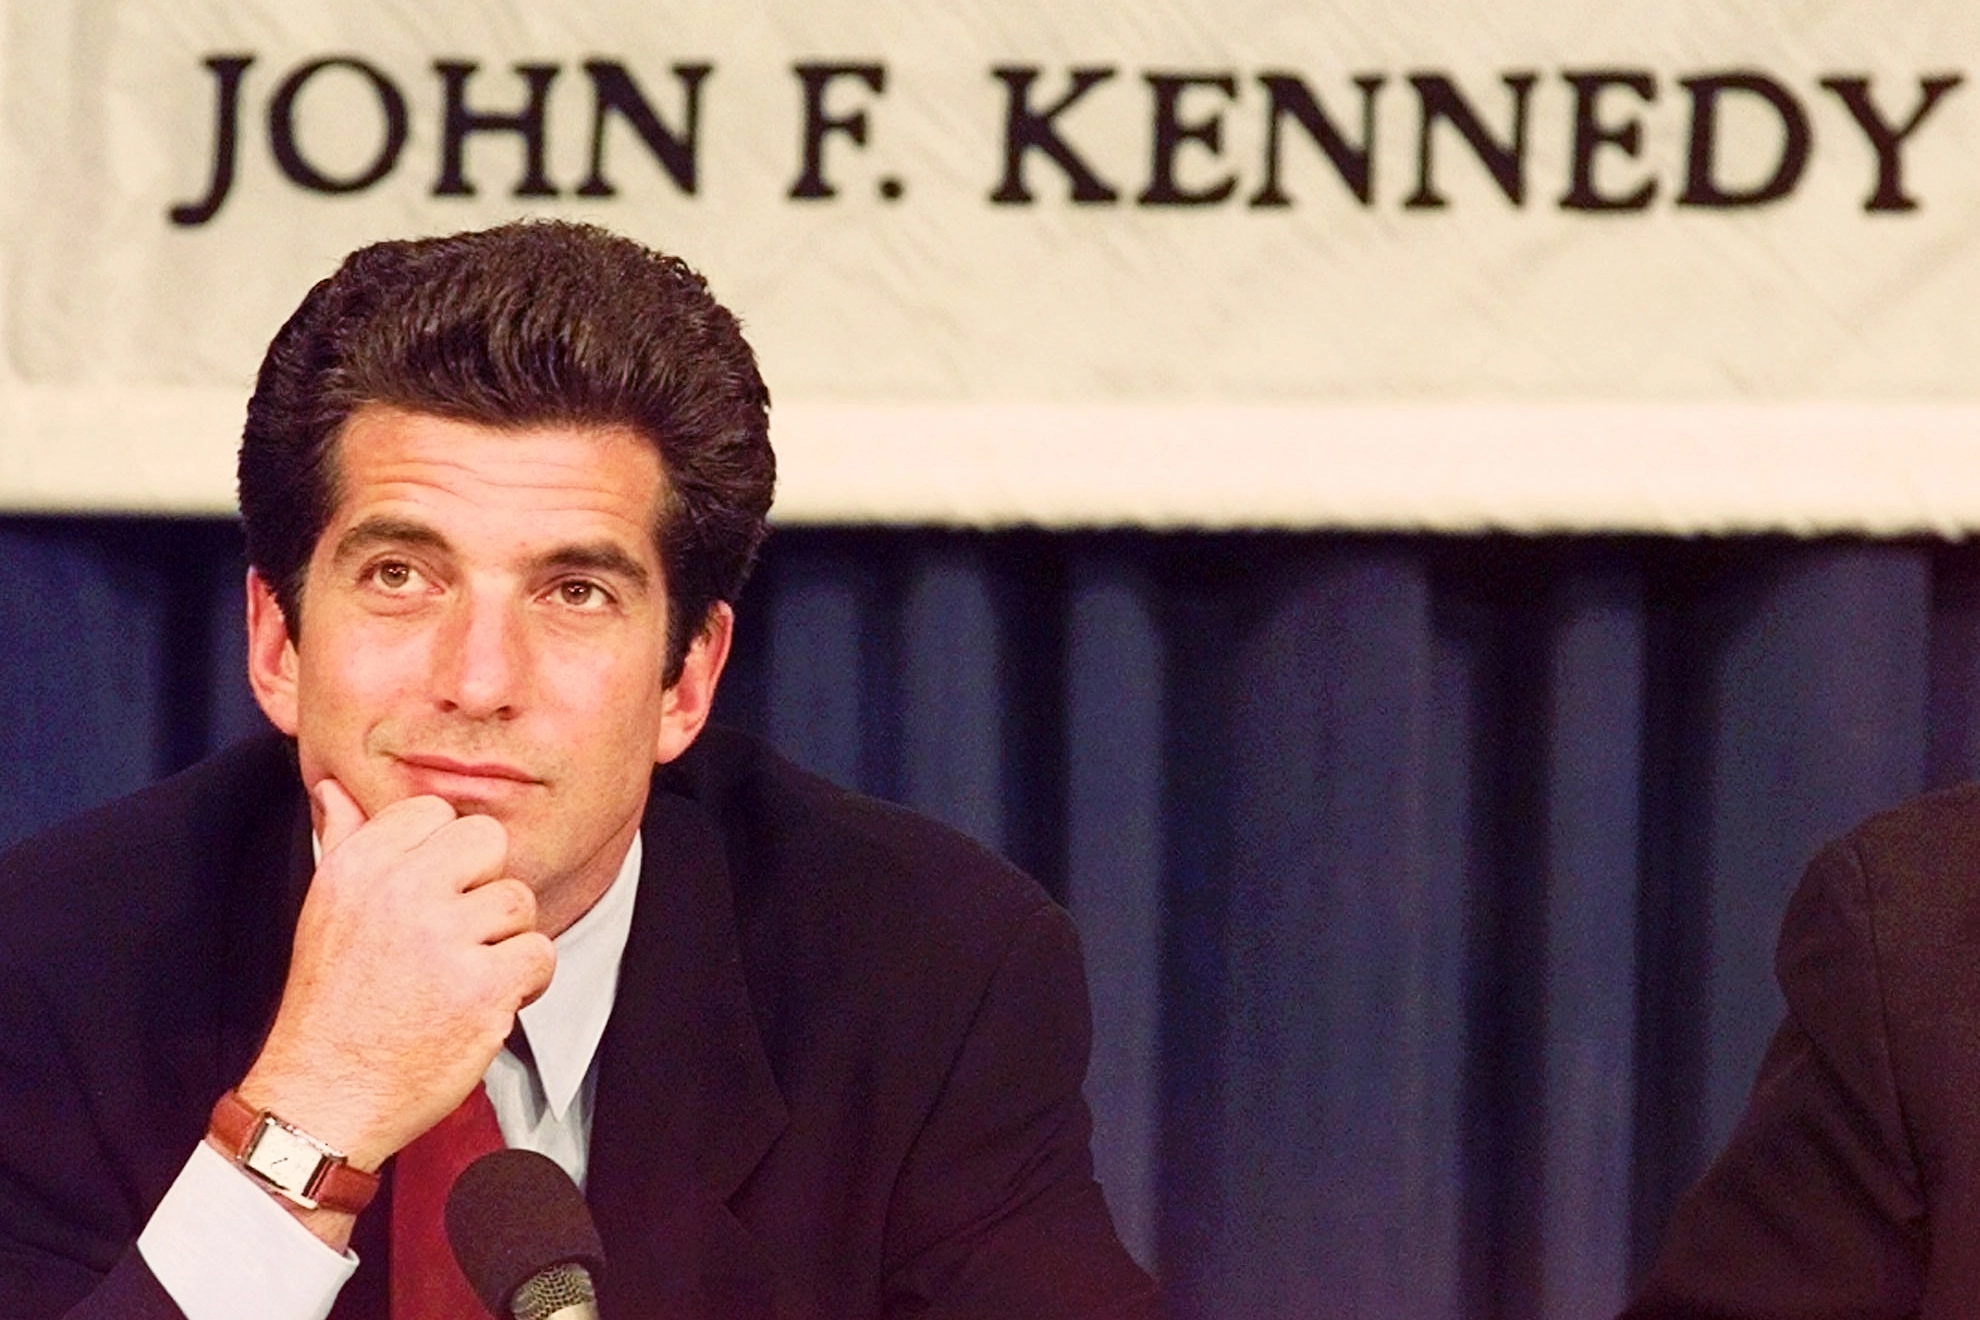 John F. Kennedy Jr. passed away at the age of 38